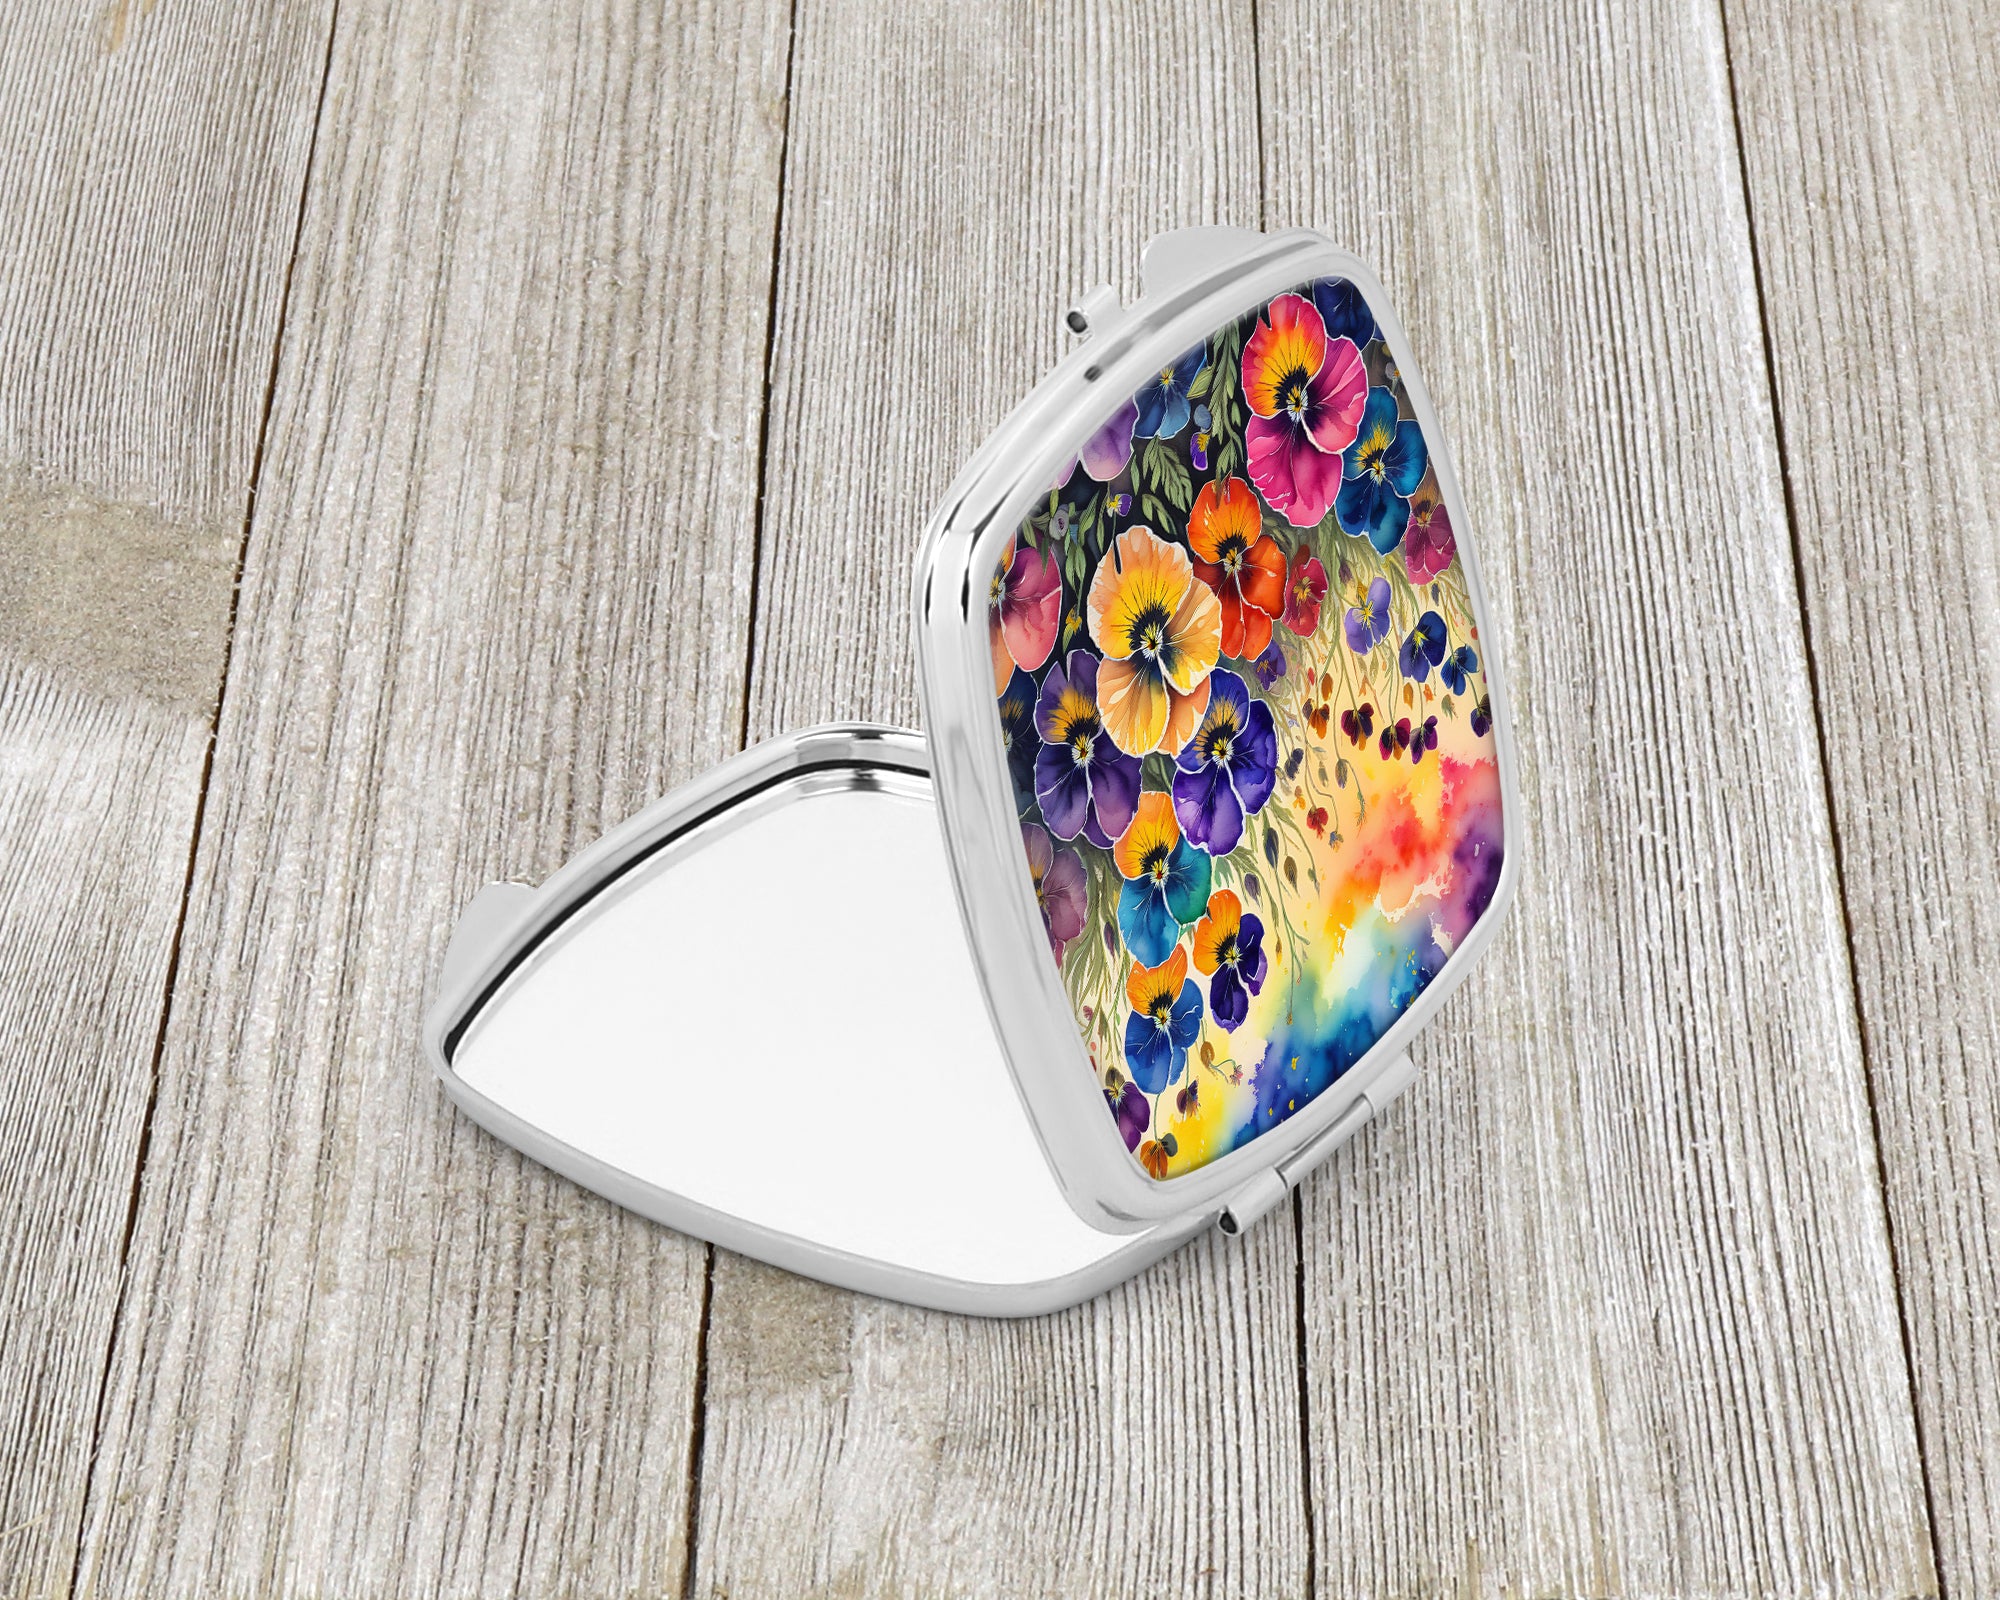 Buy this Colorful Pansies Compact Mirror